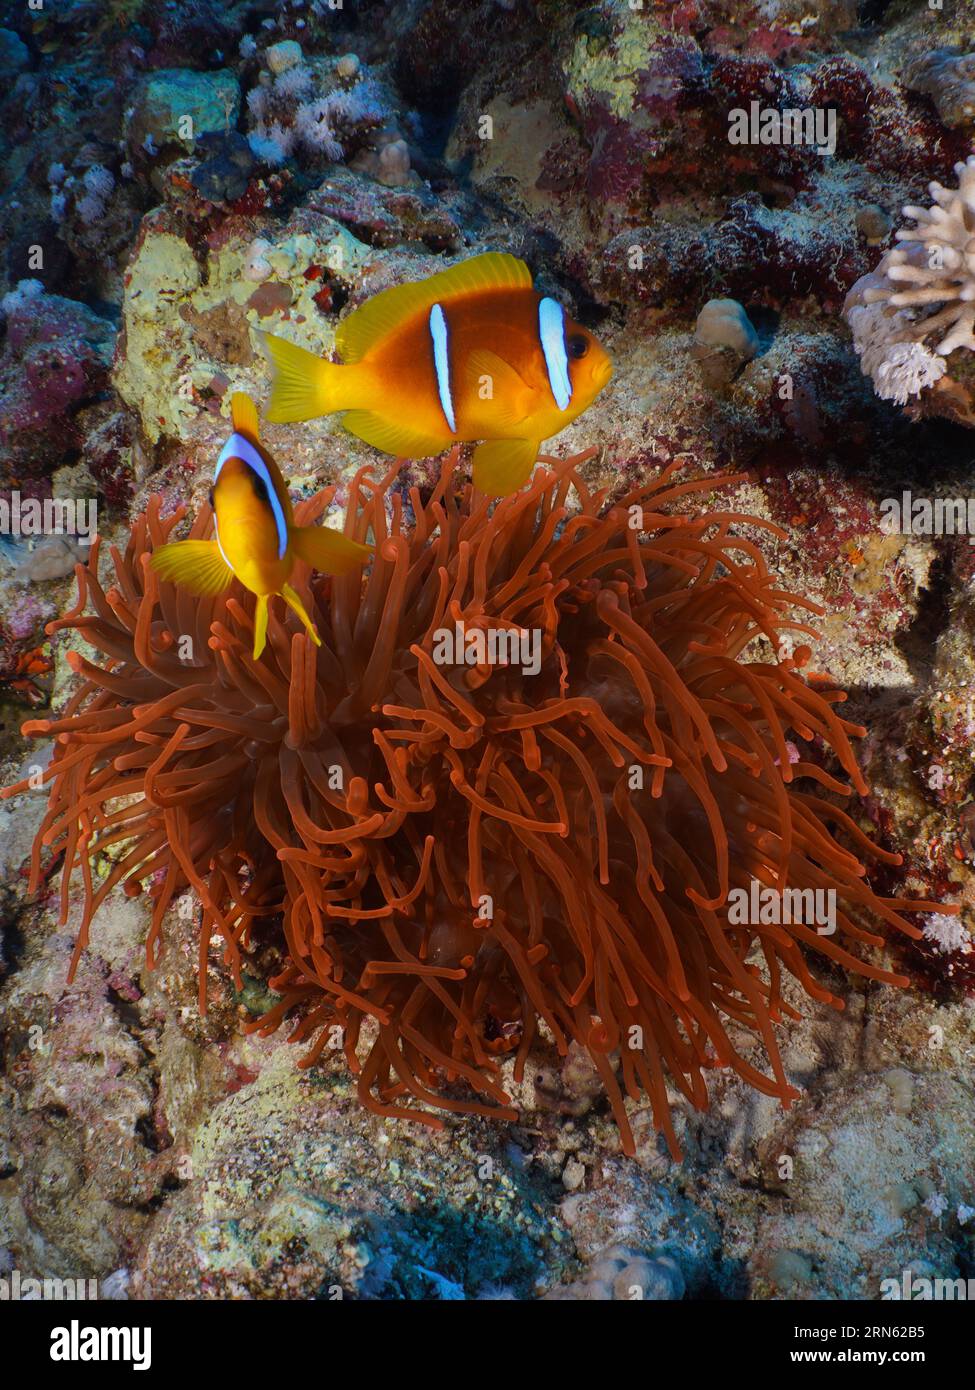 Pair of red sea clownfish (Amphiprion bicinctus) at its fluorescent bubble-tip anemone (Entacmaea quadricolor), dive site House Reef, Mangrove Bay Stock Photo